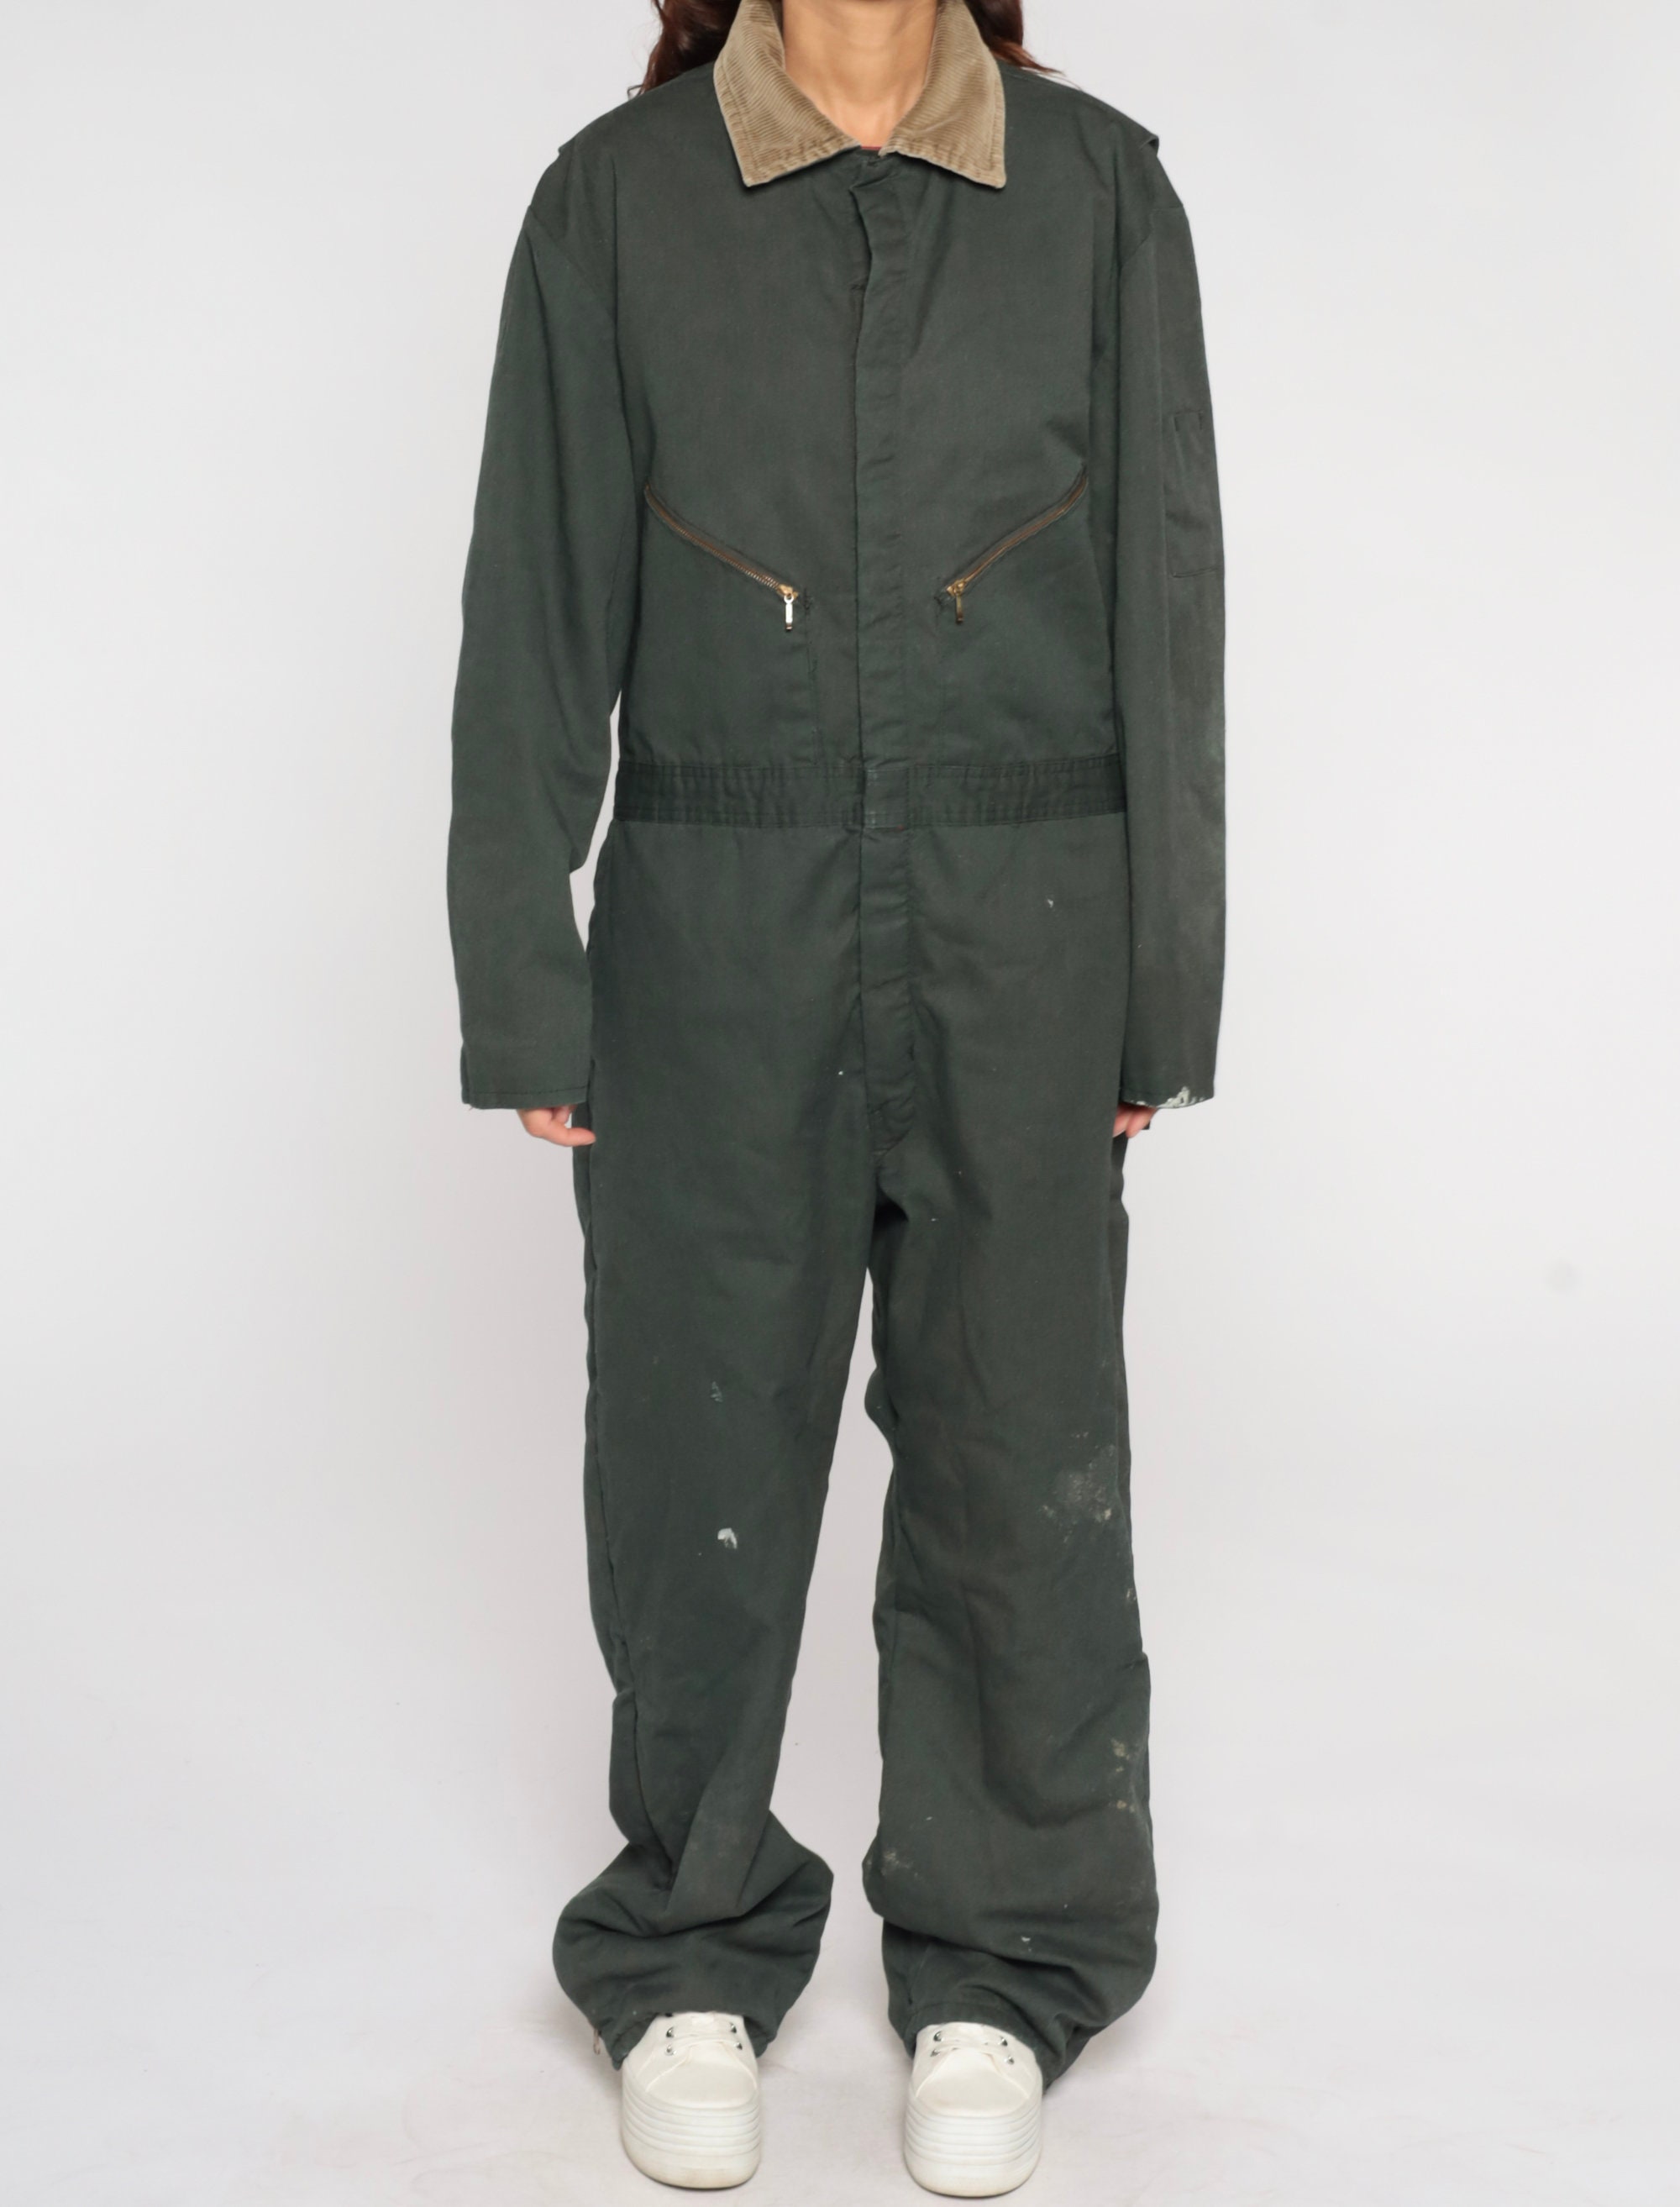 80s Walls Jumpsuit Green Coveralls Workwear Insulated Coverall Pants ...